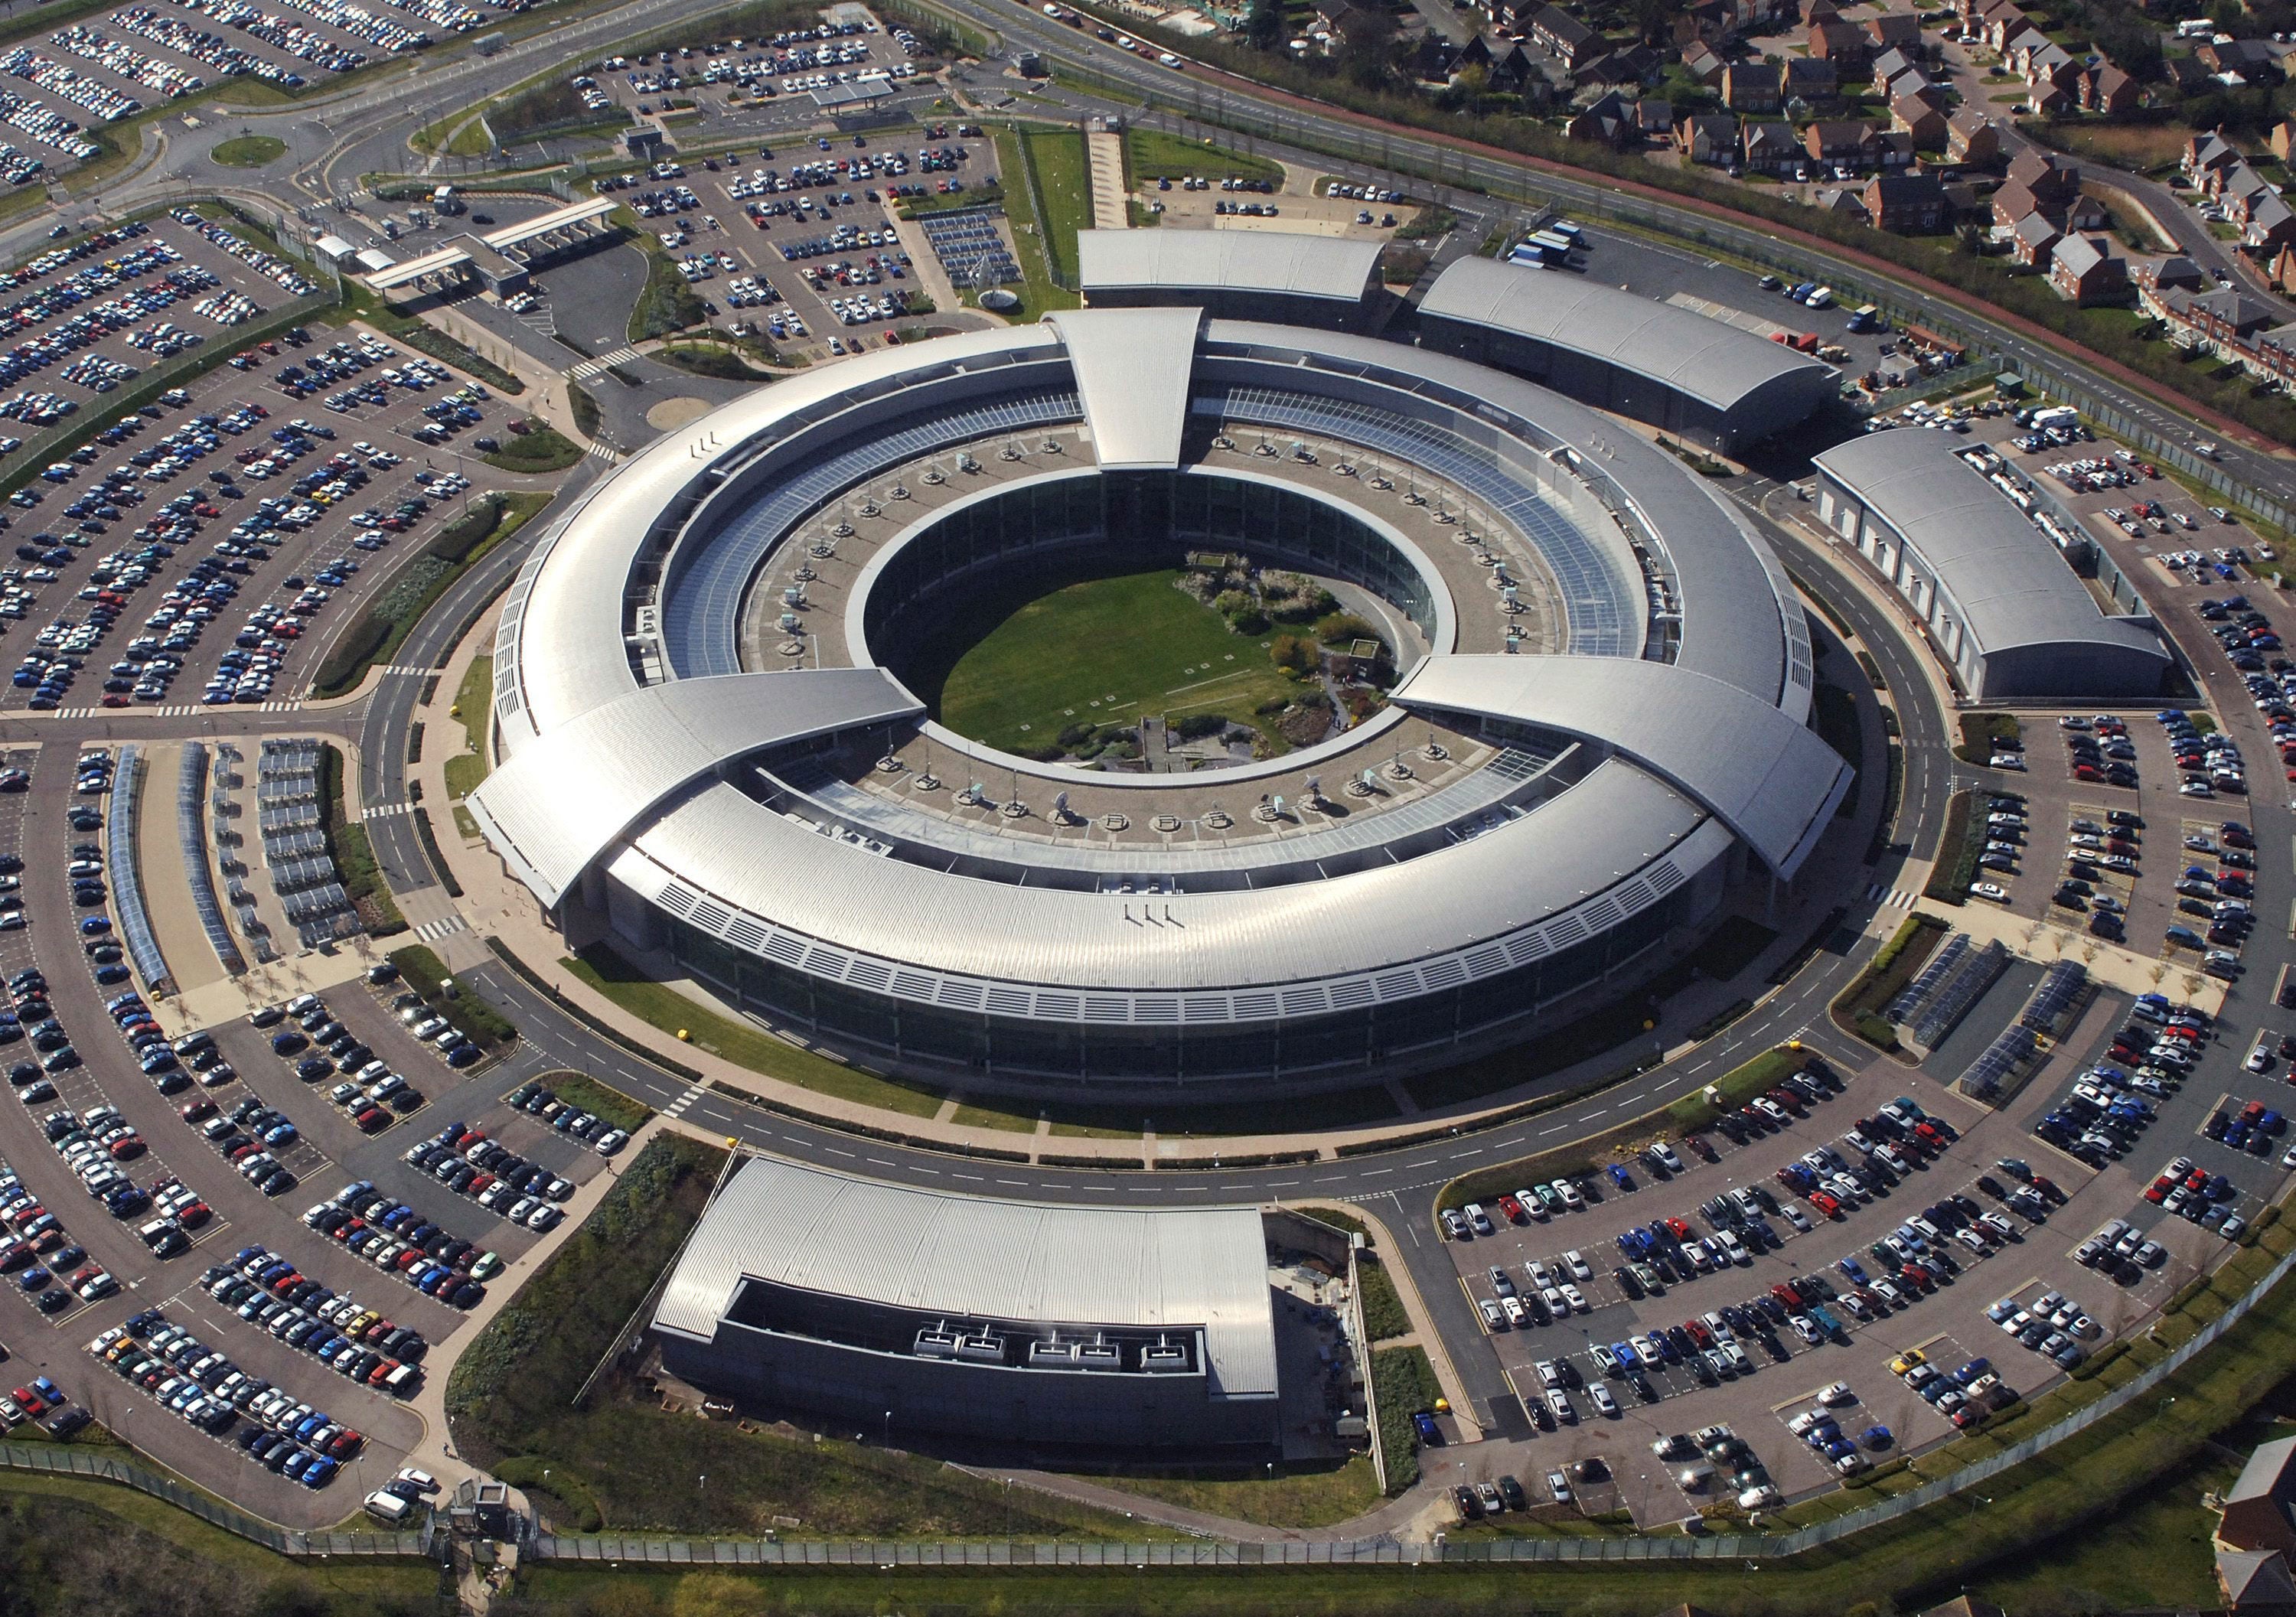 GCHQ worked in collaboration with the NSA in order to access communications from the 'big four' - Google, Facebook, Hotmail and Yahoo.